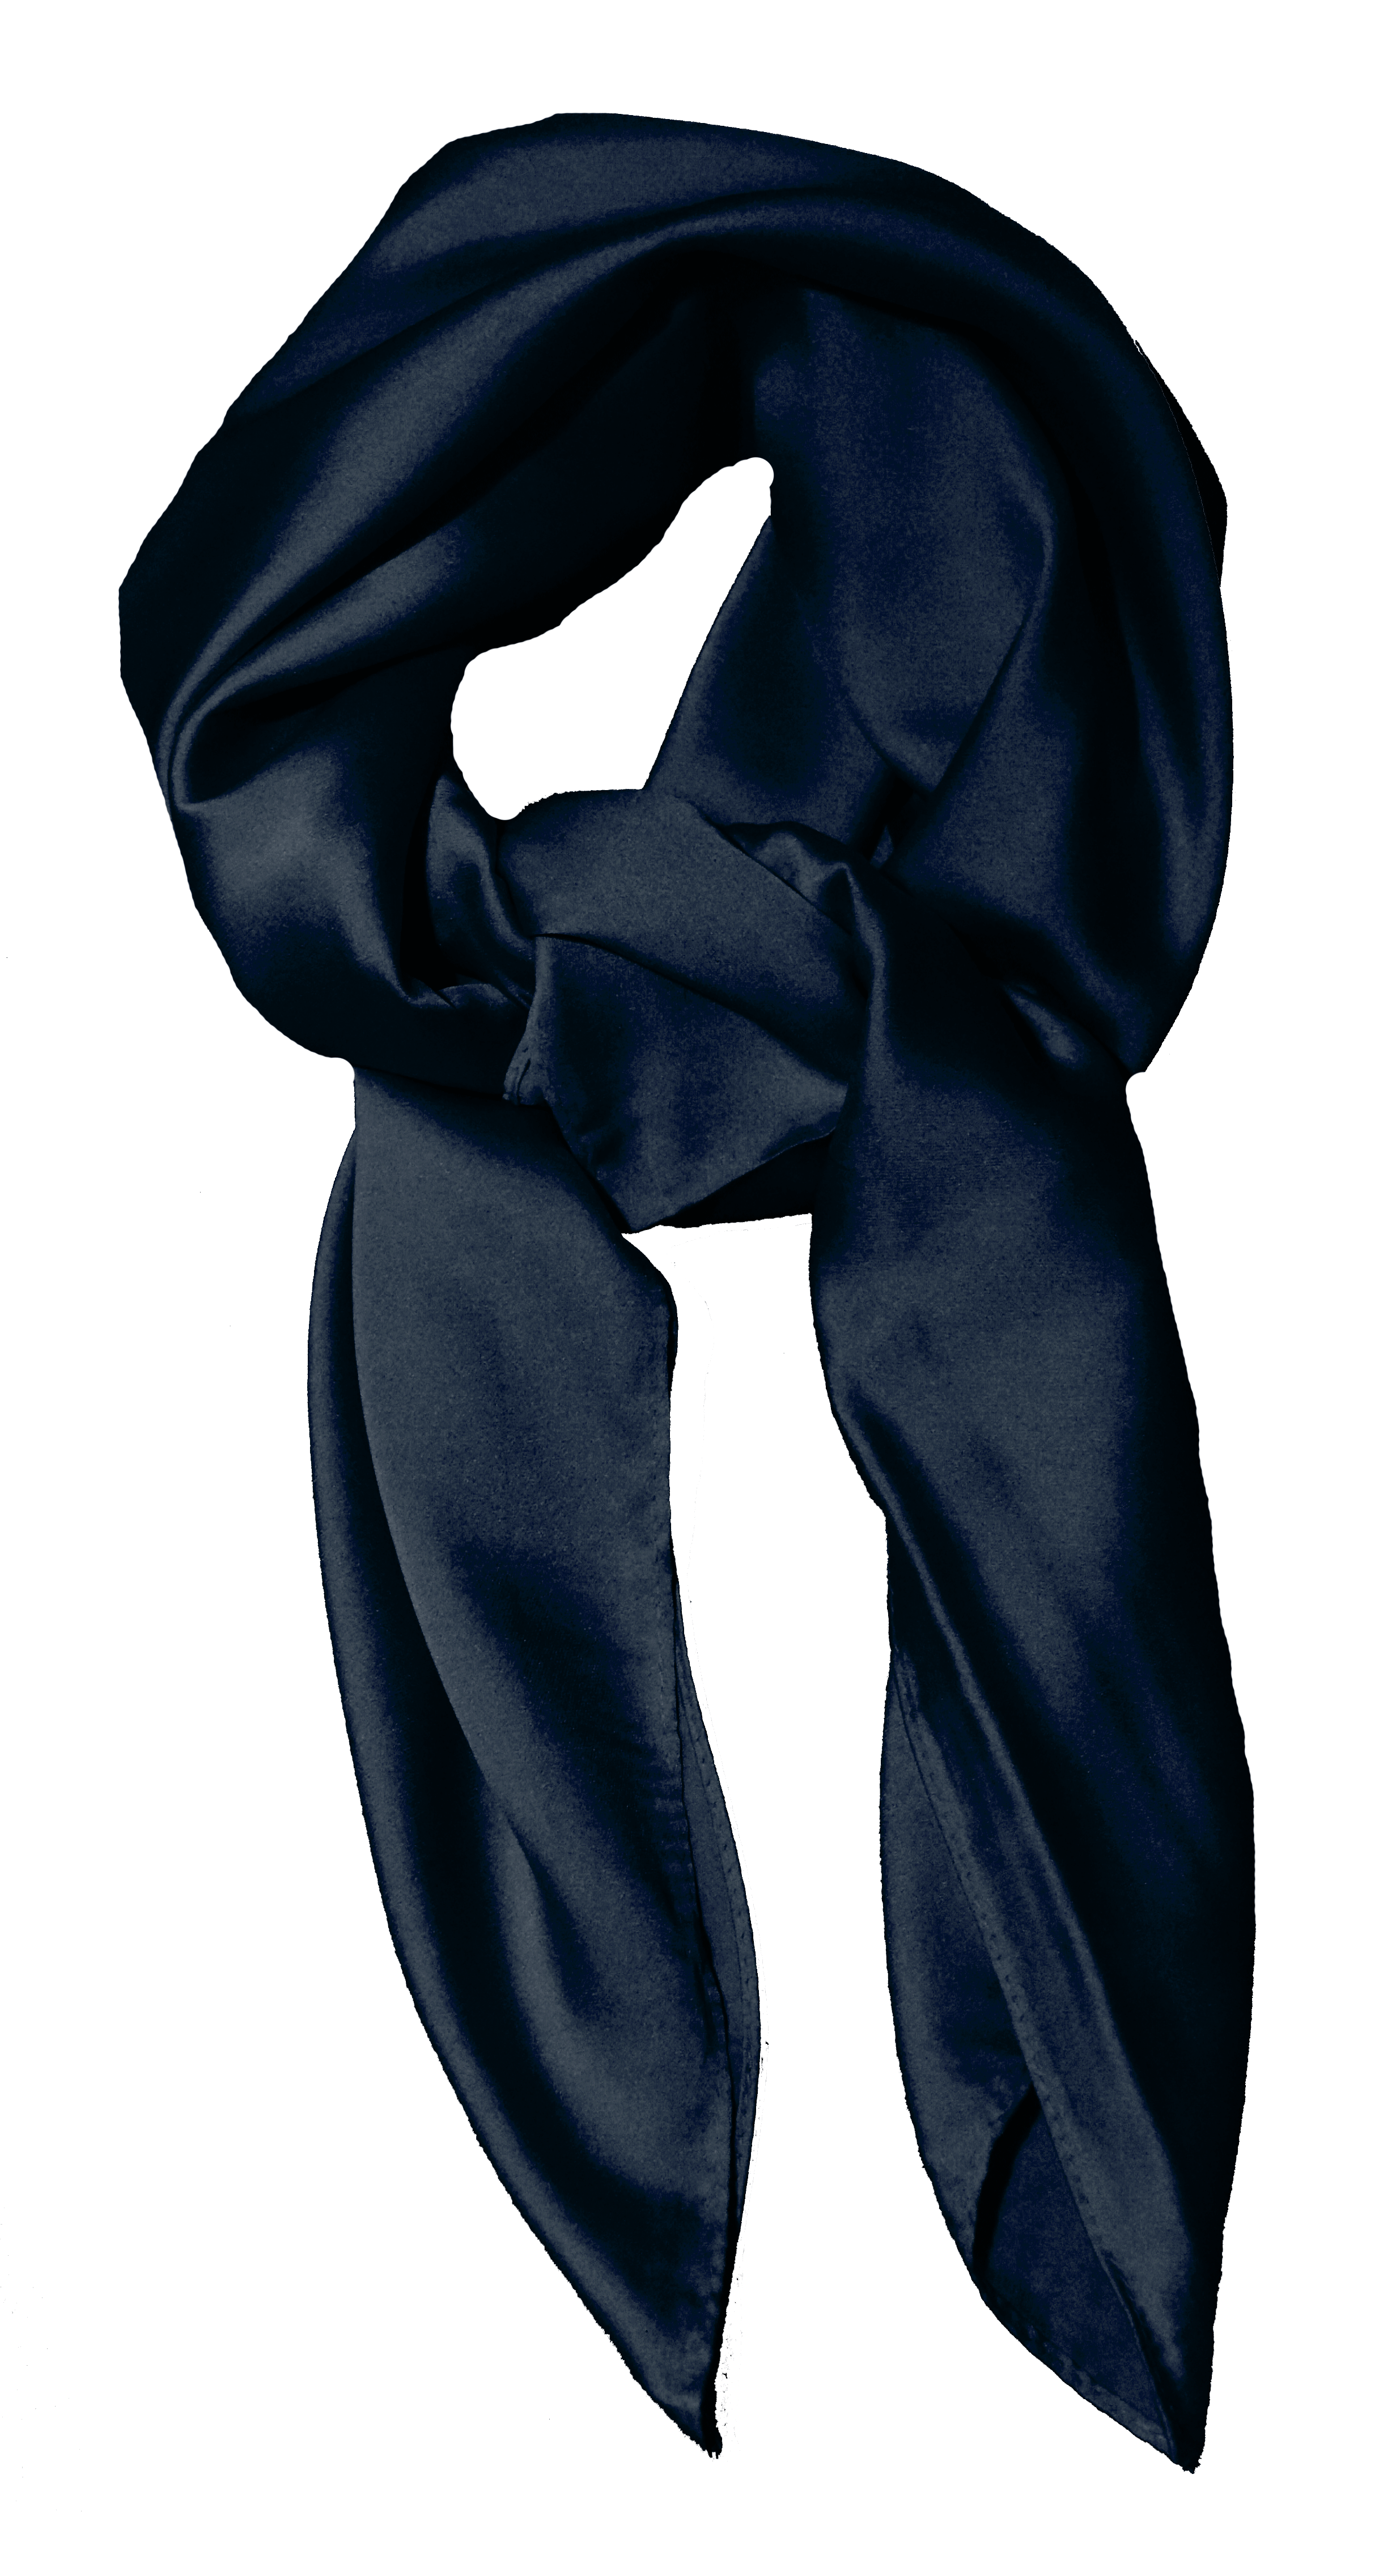 Plain Navy Scarf Thin and Silky for Summer and Spring